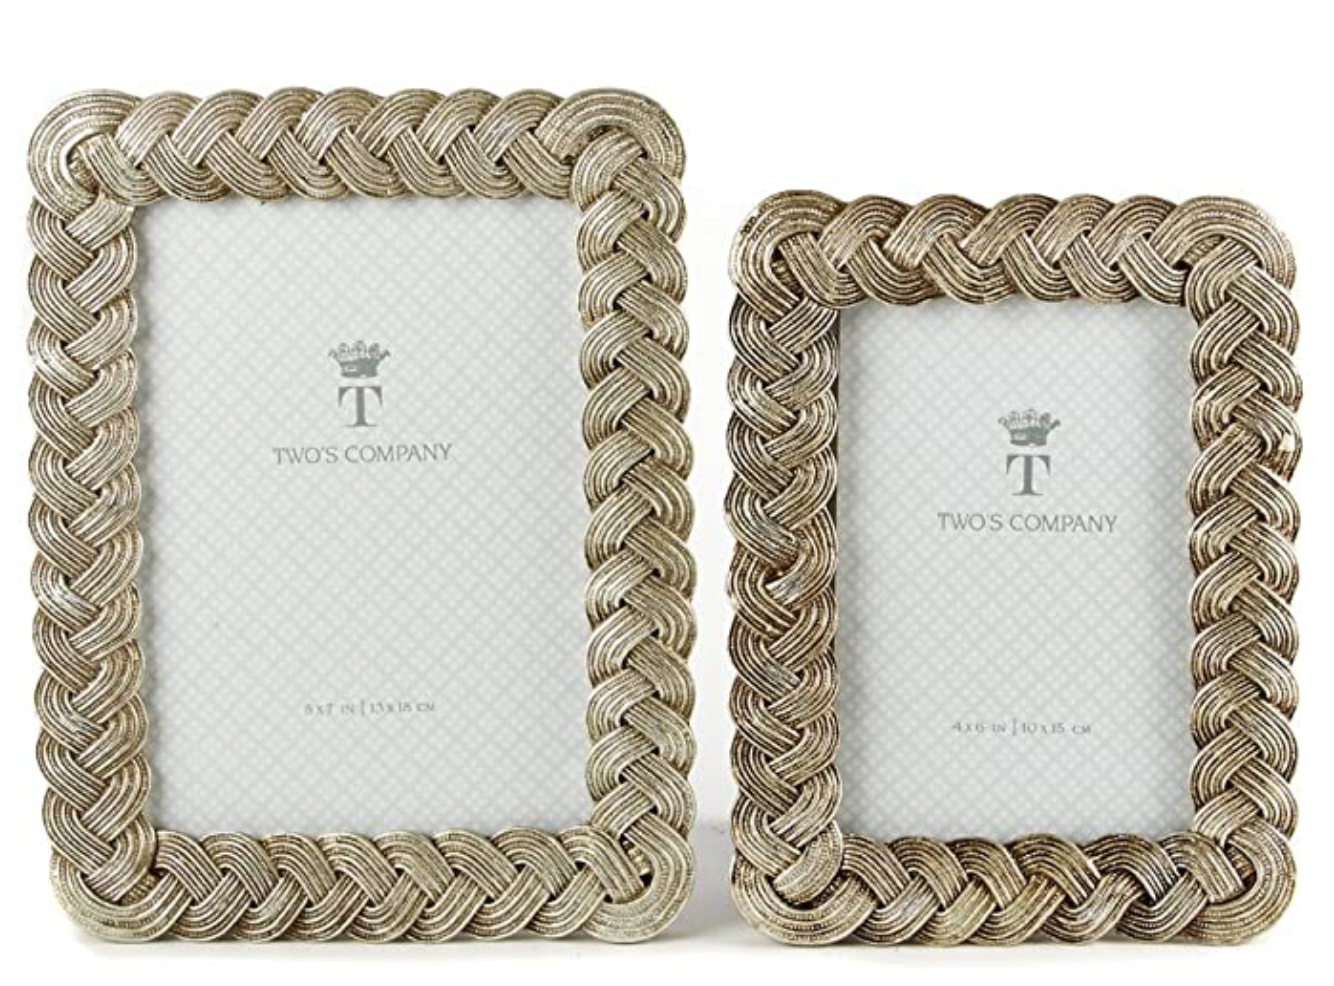 Two's Company Silver Braided Frame